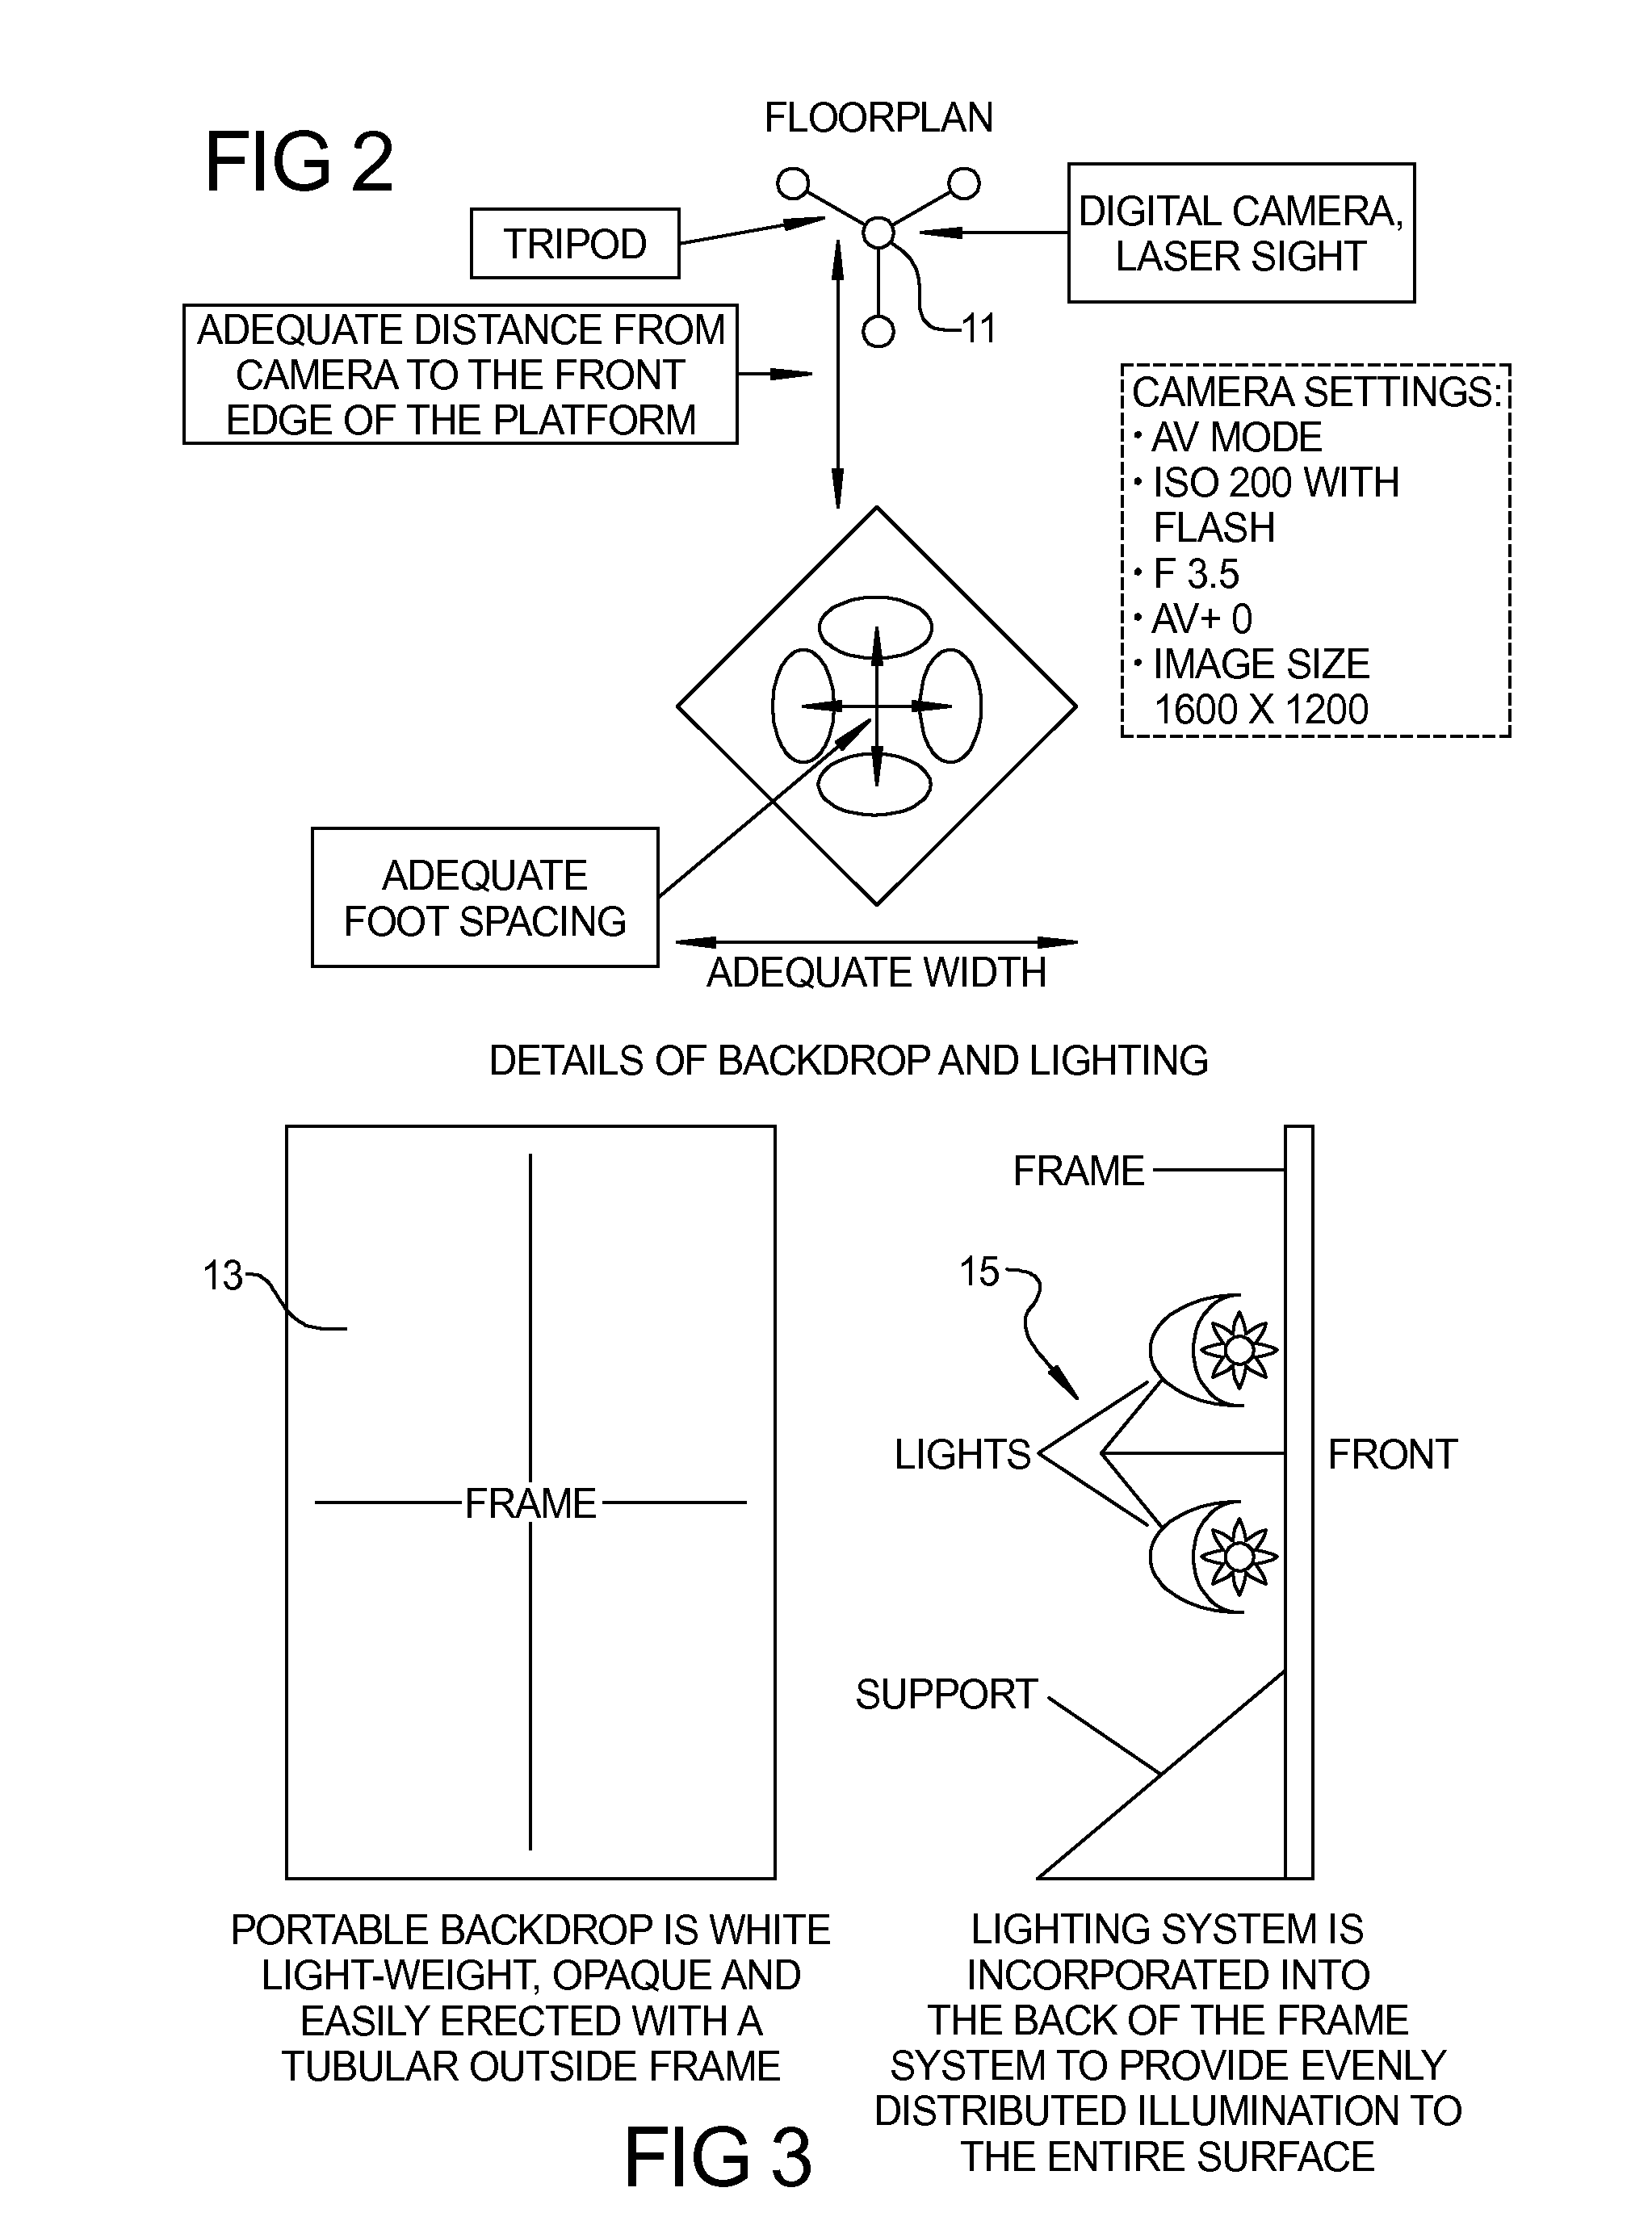 Method and system to measure body volume/surface area, estimate density and body composition based upon digital image assessment